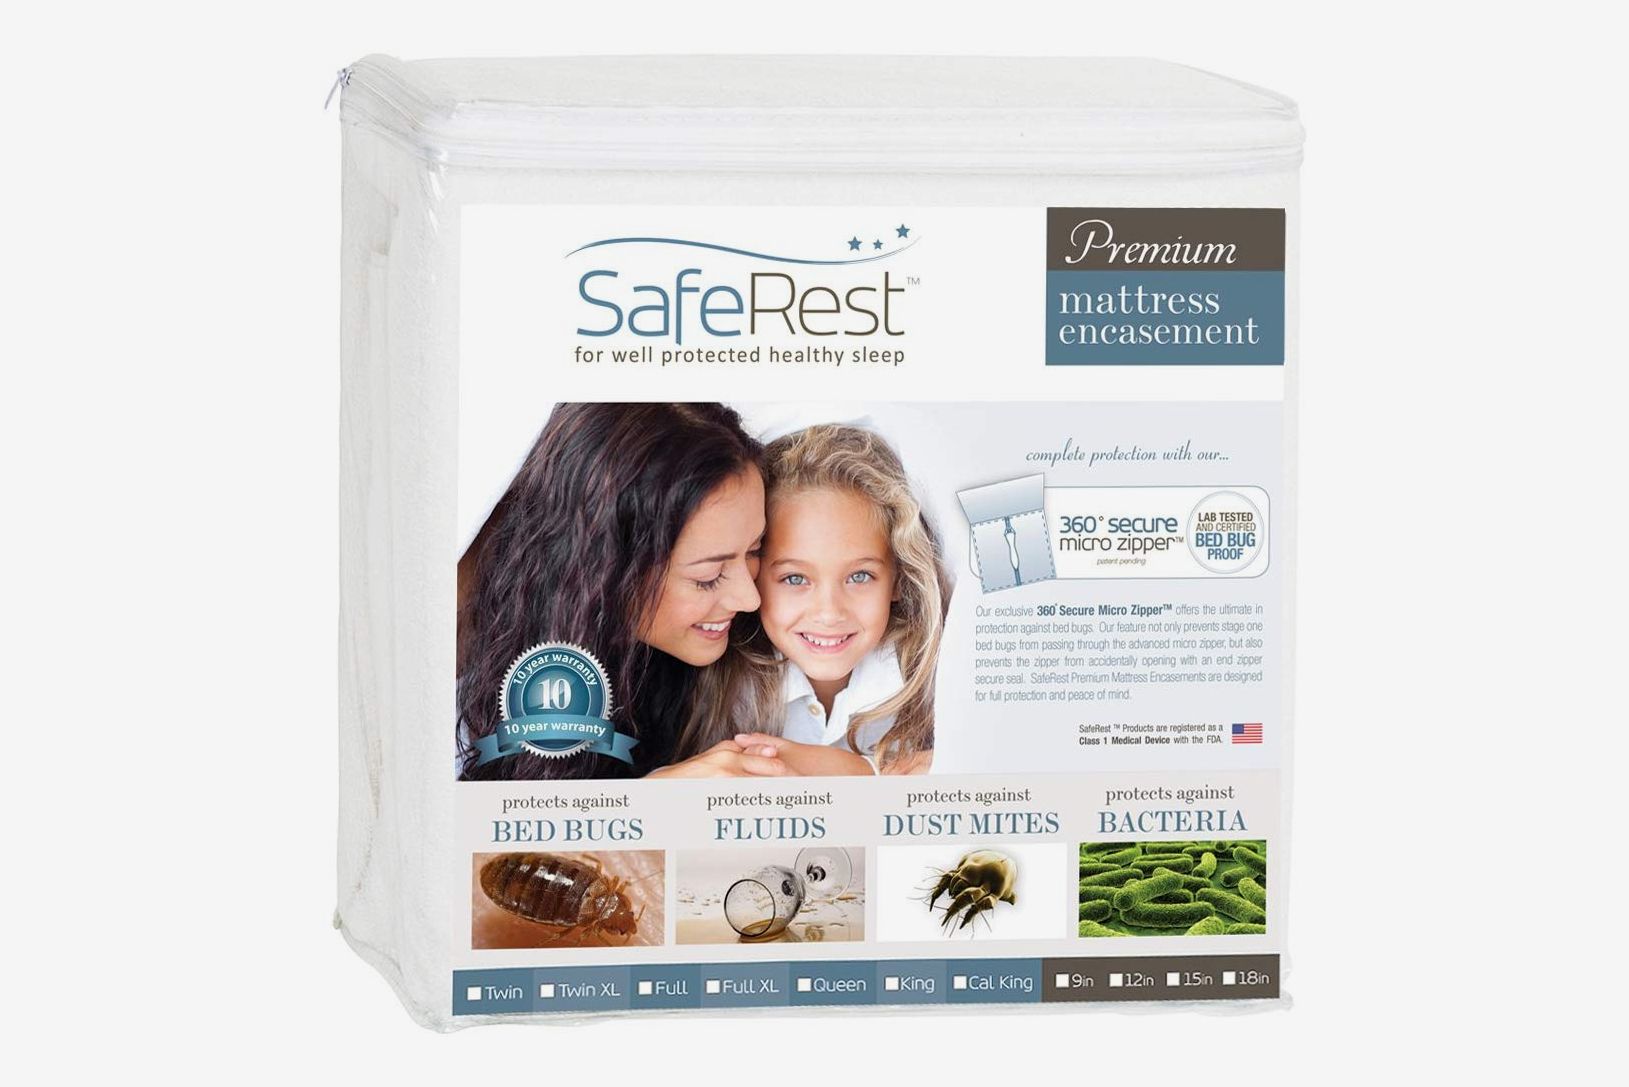 5 Best Bedbug Mattress Cover 2020 The, Does Bed Bug Protector Work